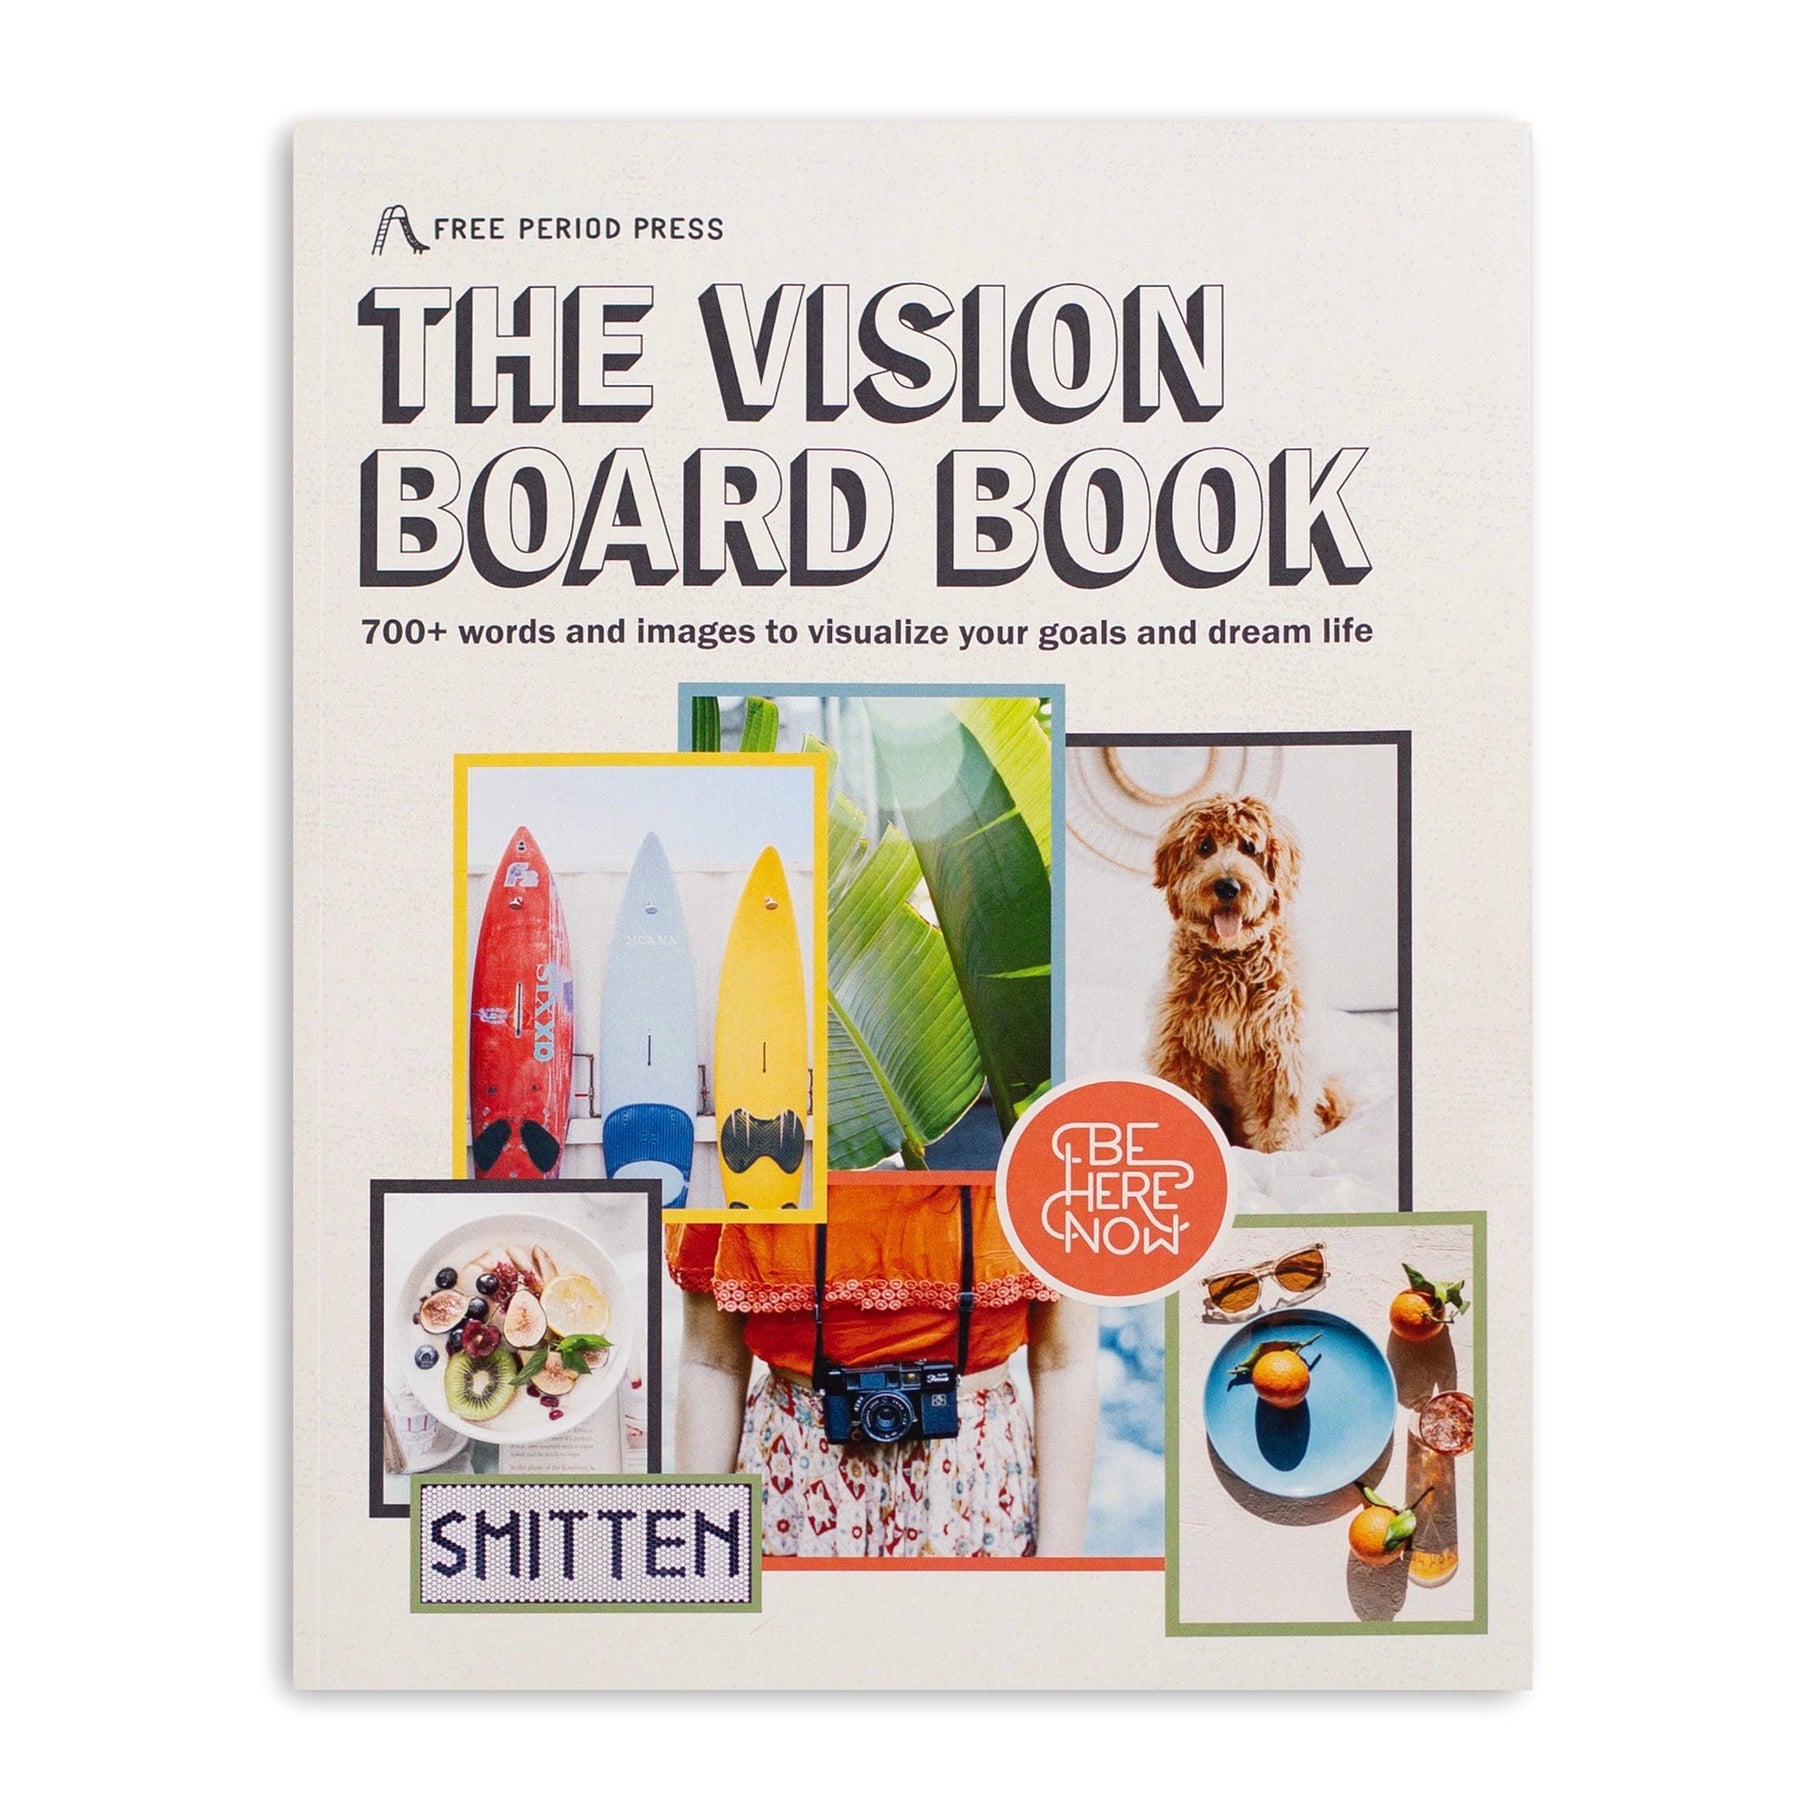 Lamare Vision Board Kit - Vision Board Supplies, Dream Board, Mood Board, Collage Book - 150 Vision Board Pictures, Quotes - Interchangeable Cut, Tape